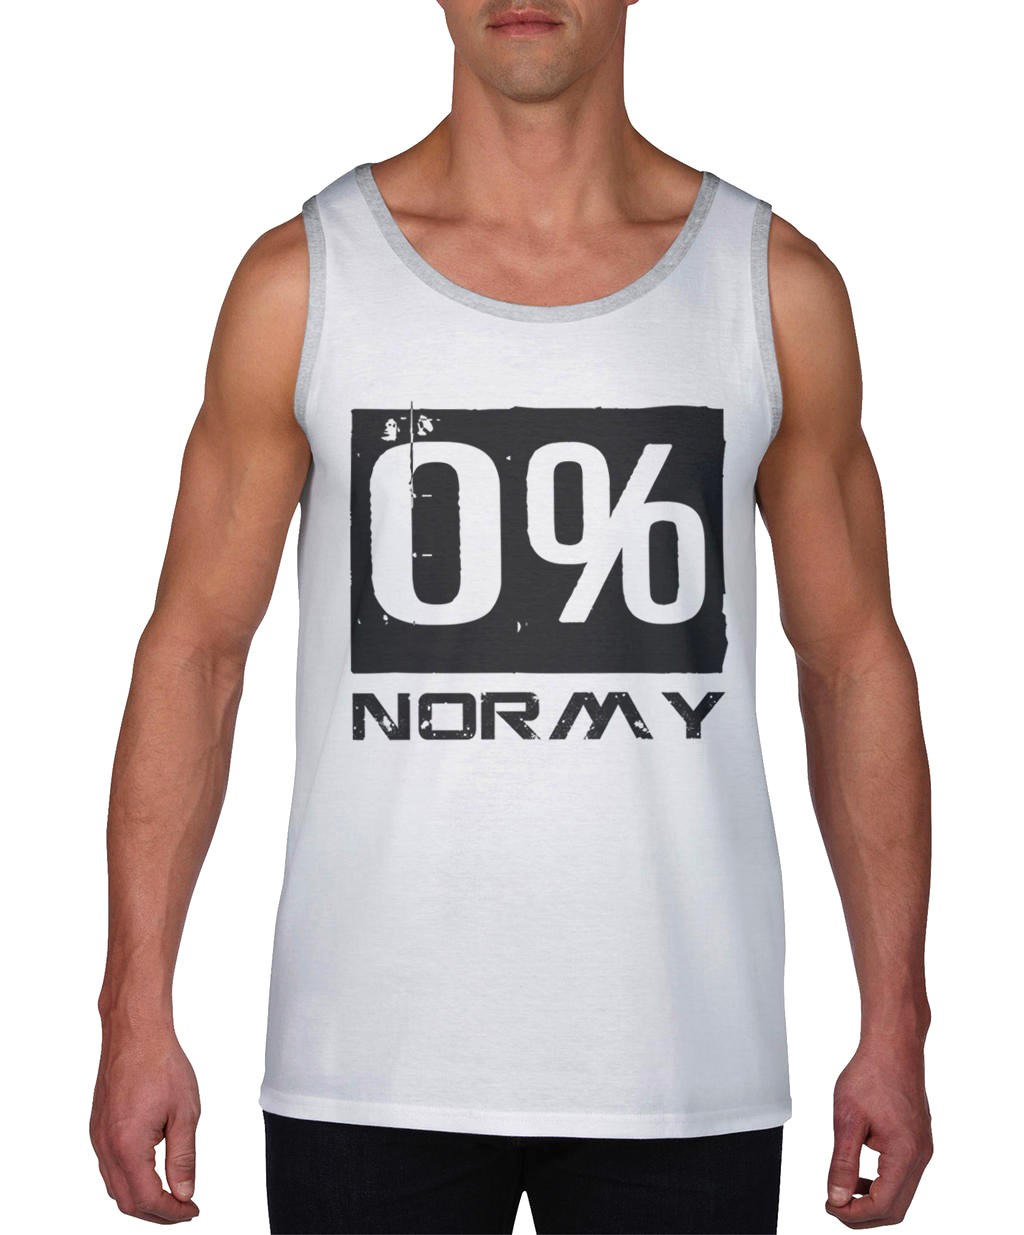 Tank Top 0%Normy